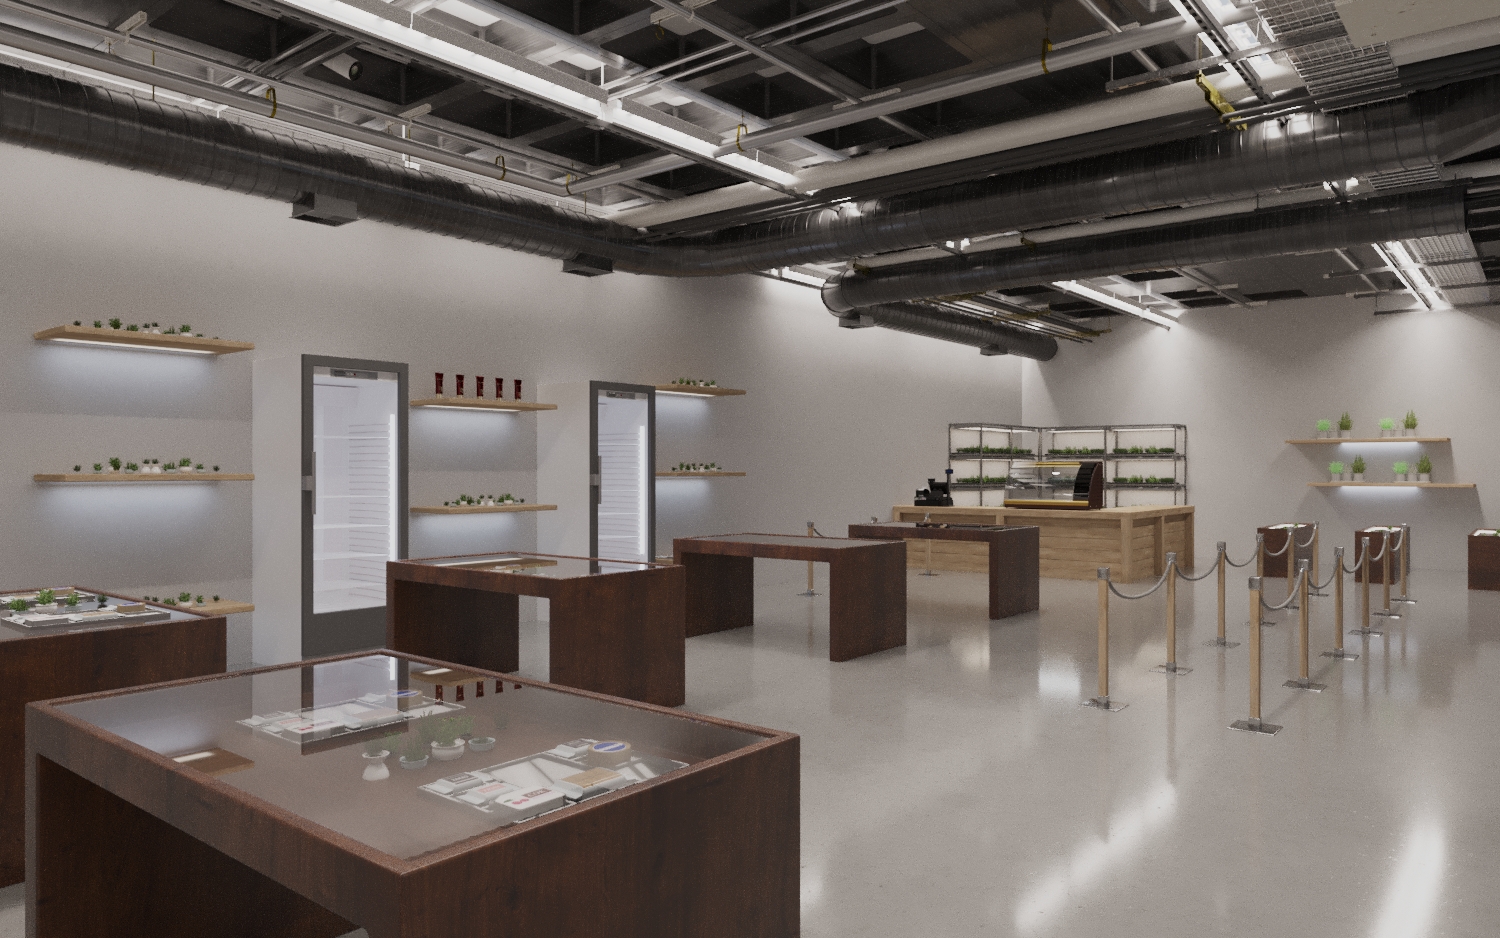 Dispensary Management Architecture in the Cannabis Industry